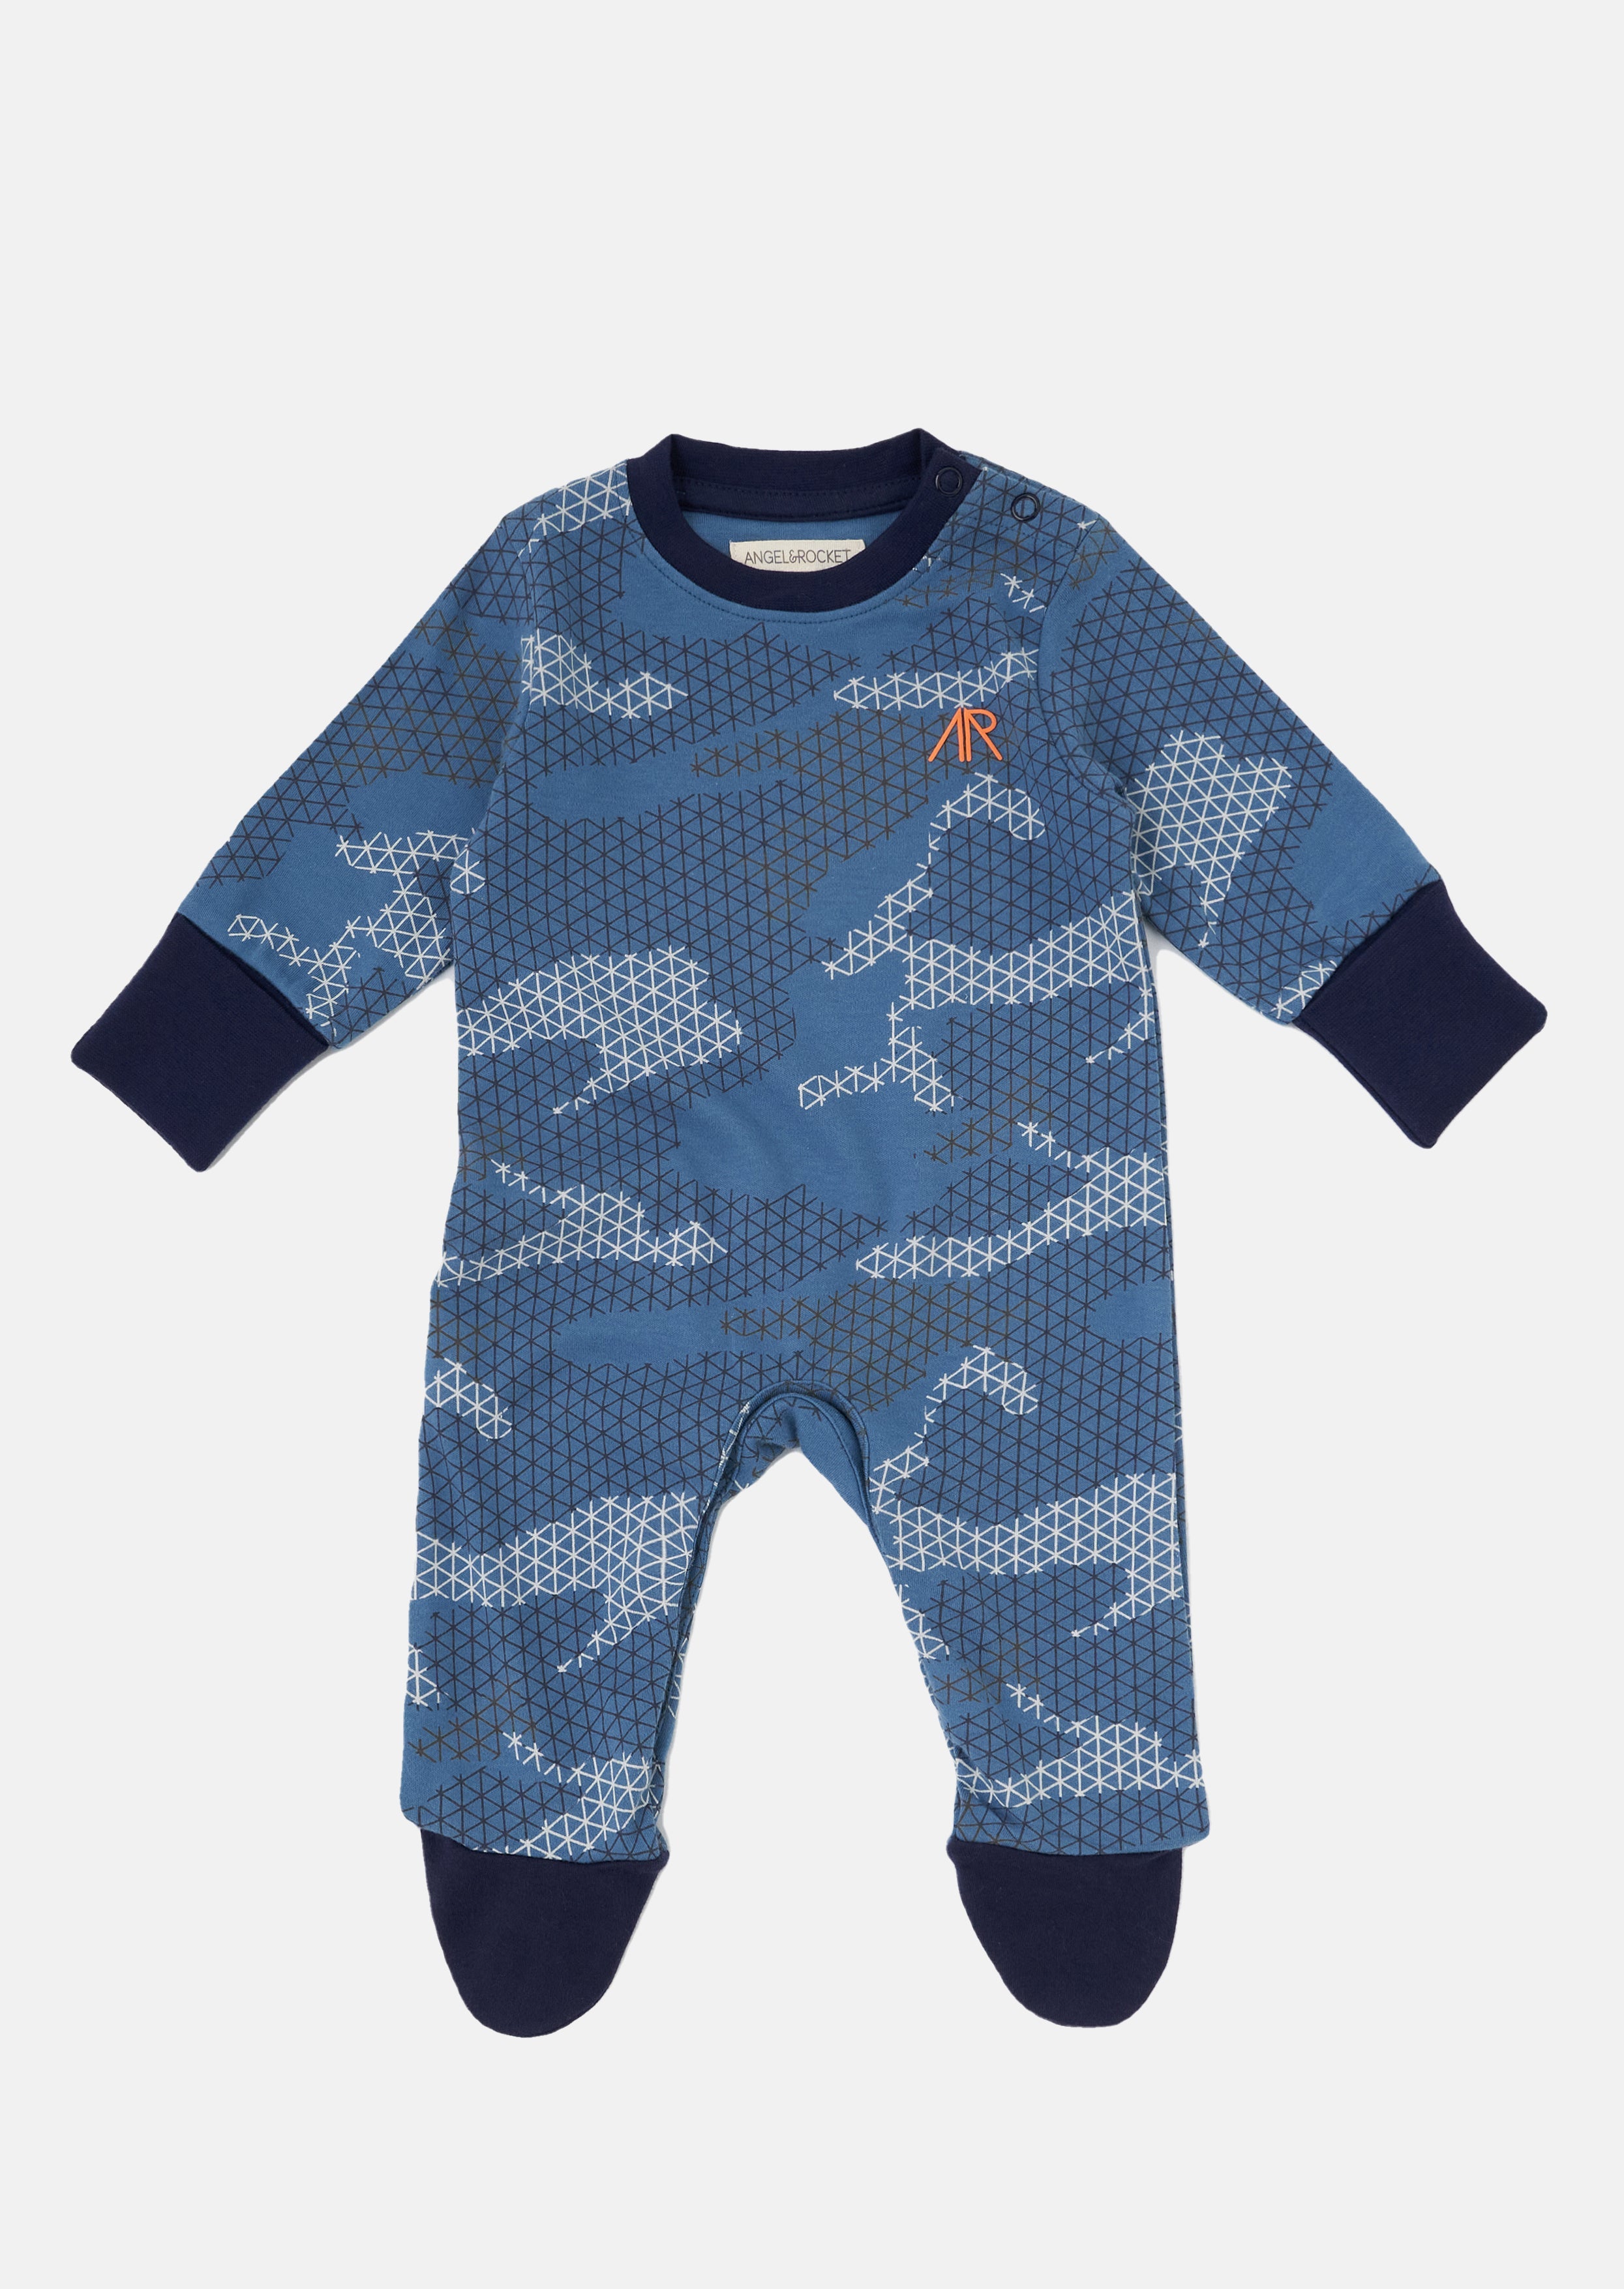 Baby Boy Camo Printed All in One Blue Sleepsuit